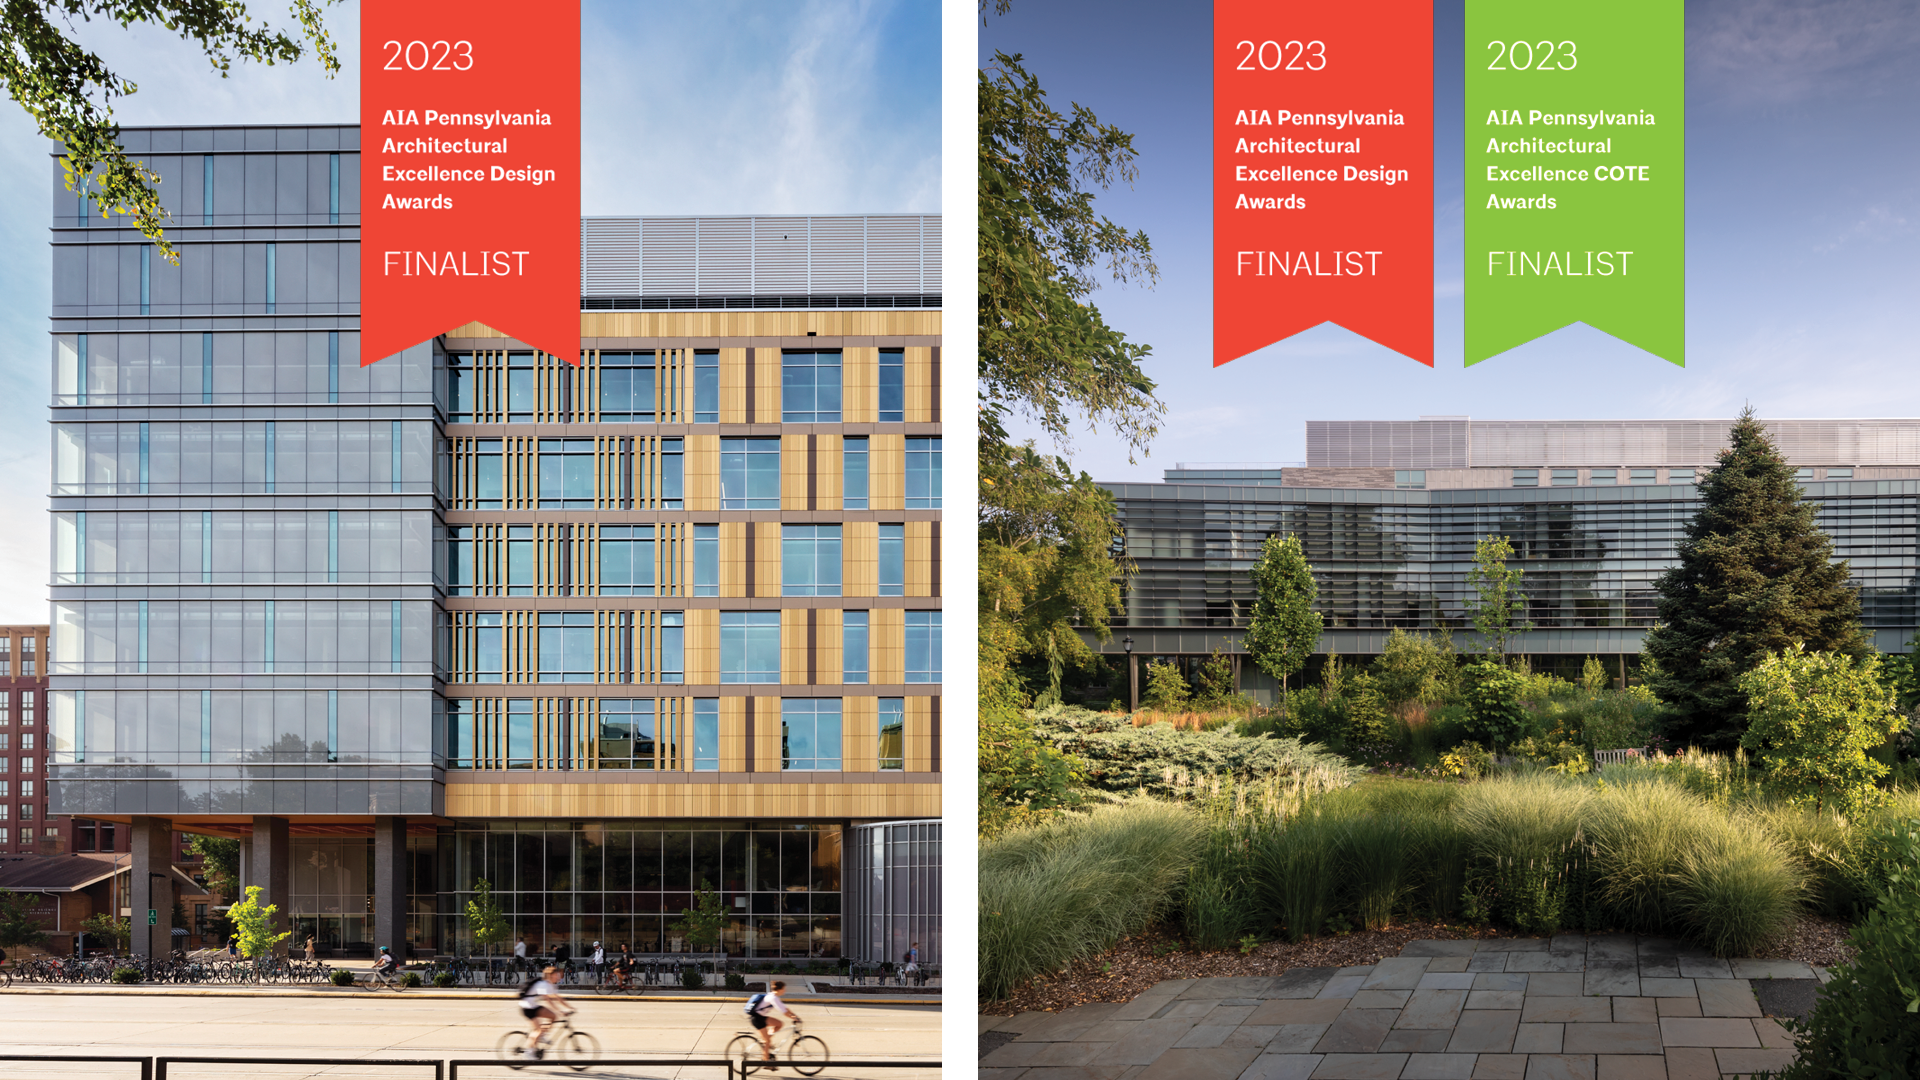 Chemistry tower at University of Wisconsin-Madison and Singer Hall at Swarthmore College both selected as finalists for AIA Pennsylvania Awards